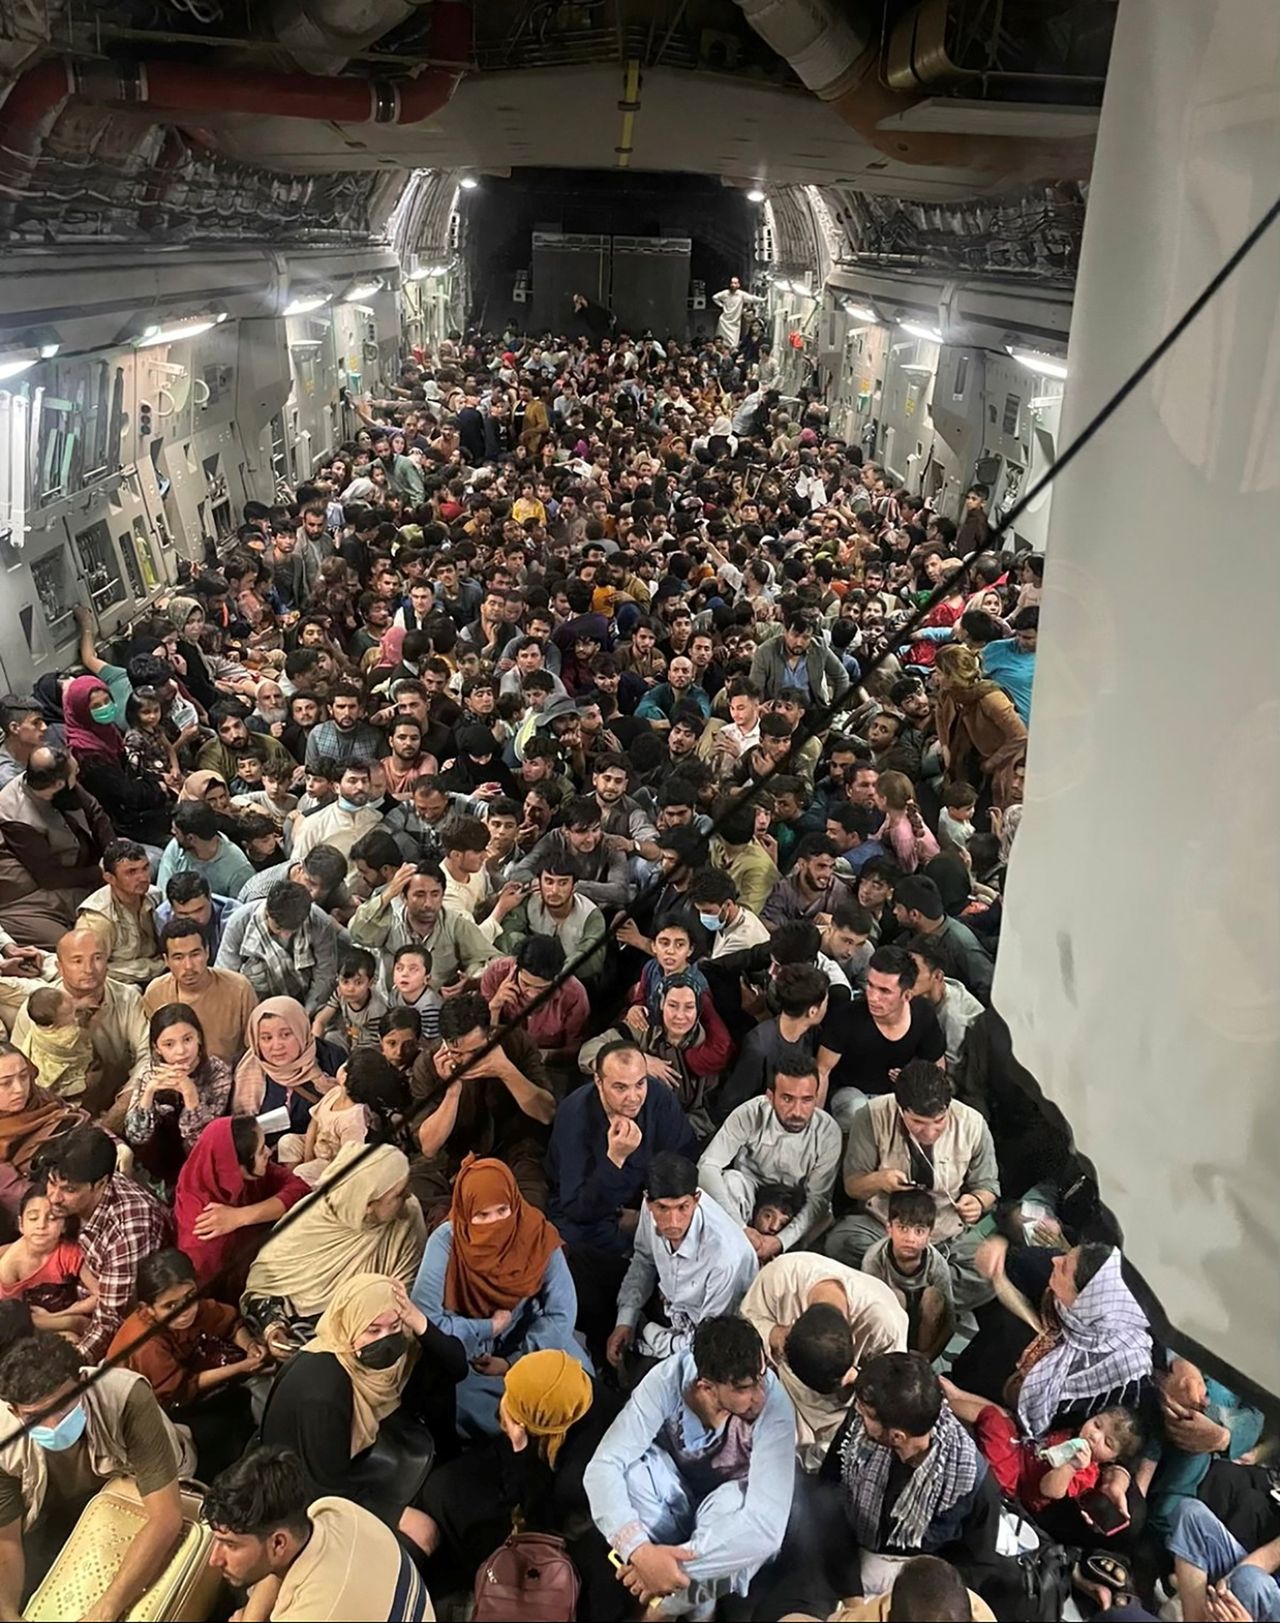 Evacuees crowd the interior of a U.S. Air Force C-17 Globemaster III transport aircraft